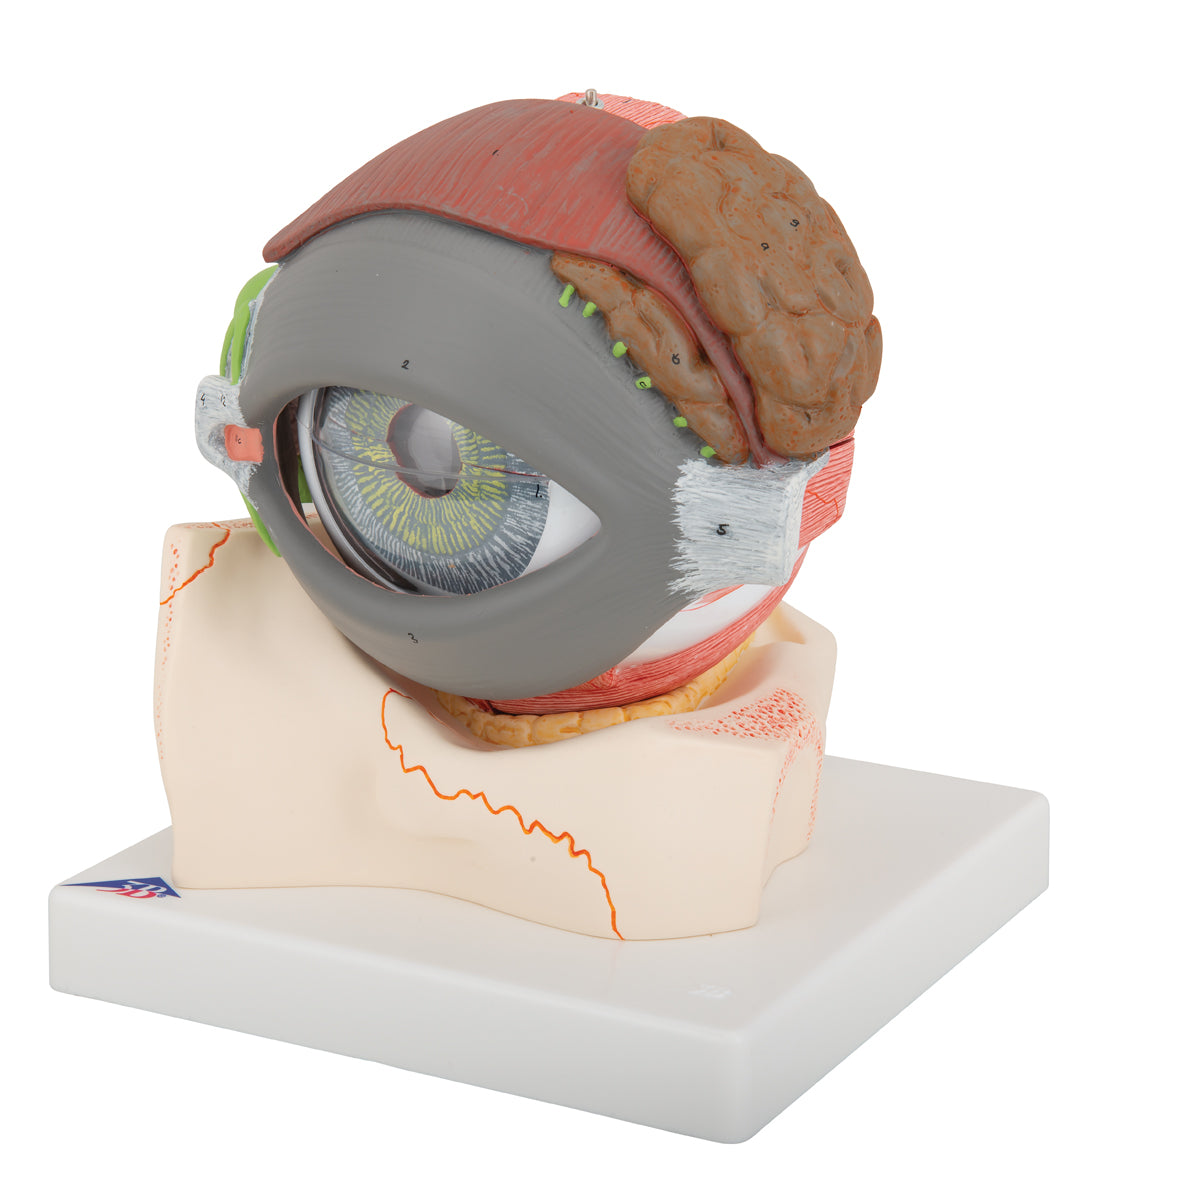 Complete eye model which is enlarged and can be separated into 8 parts